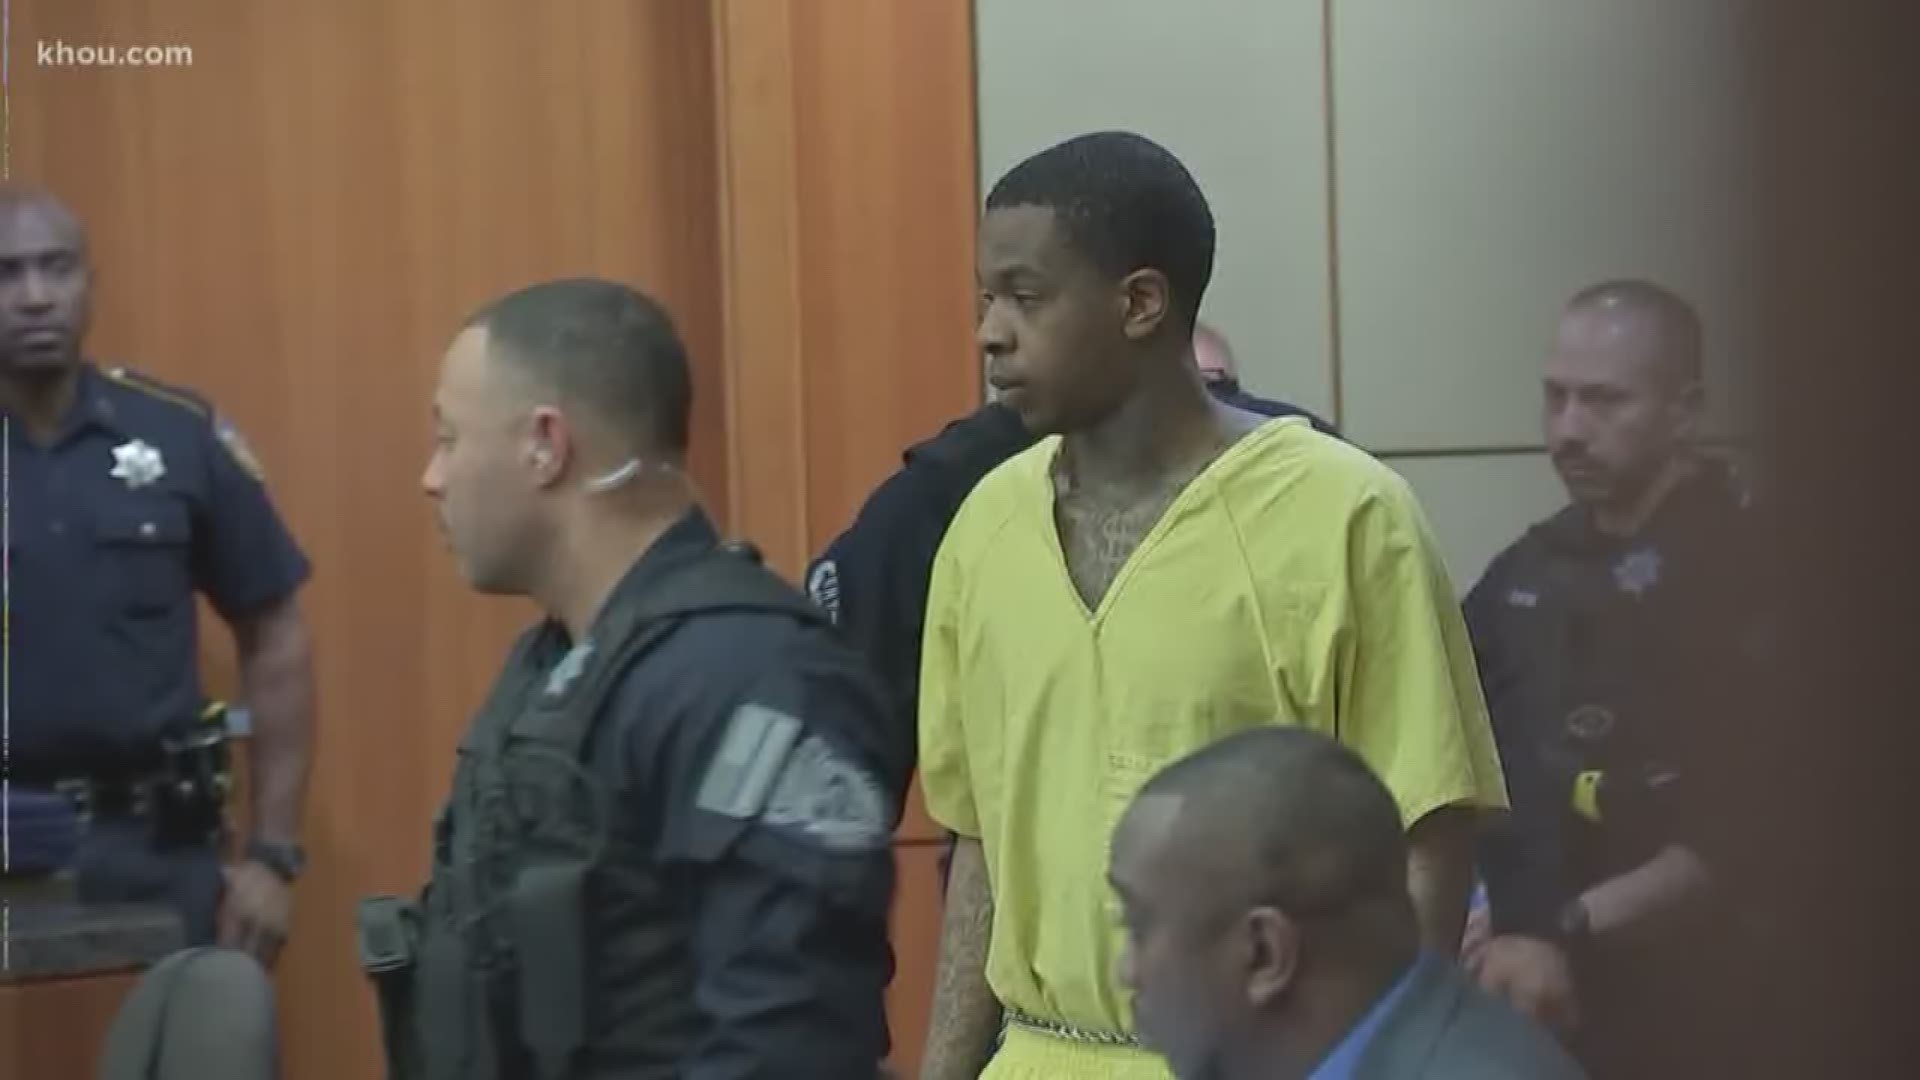 Larry D. Woodruffe, a capital murder suspect in the shooting death of 7-year-old Jazmine Barnes, faced a judge for the first time Thursday morning. Prosecutors say Woodruffe was the gunman who killed the seven-year-old girl. Woodruffe's court-appointed de